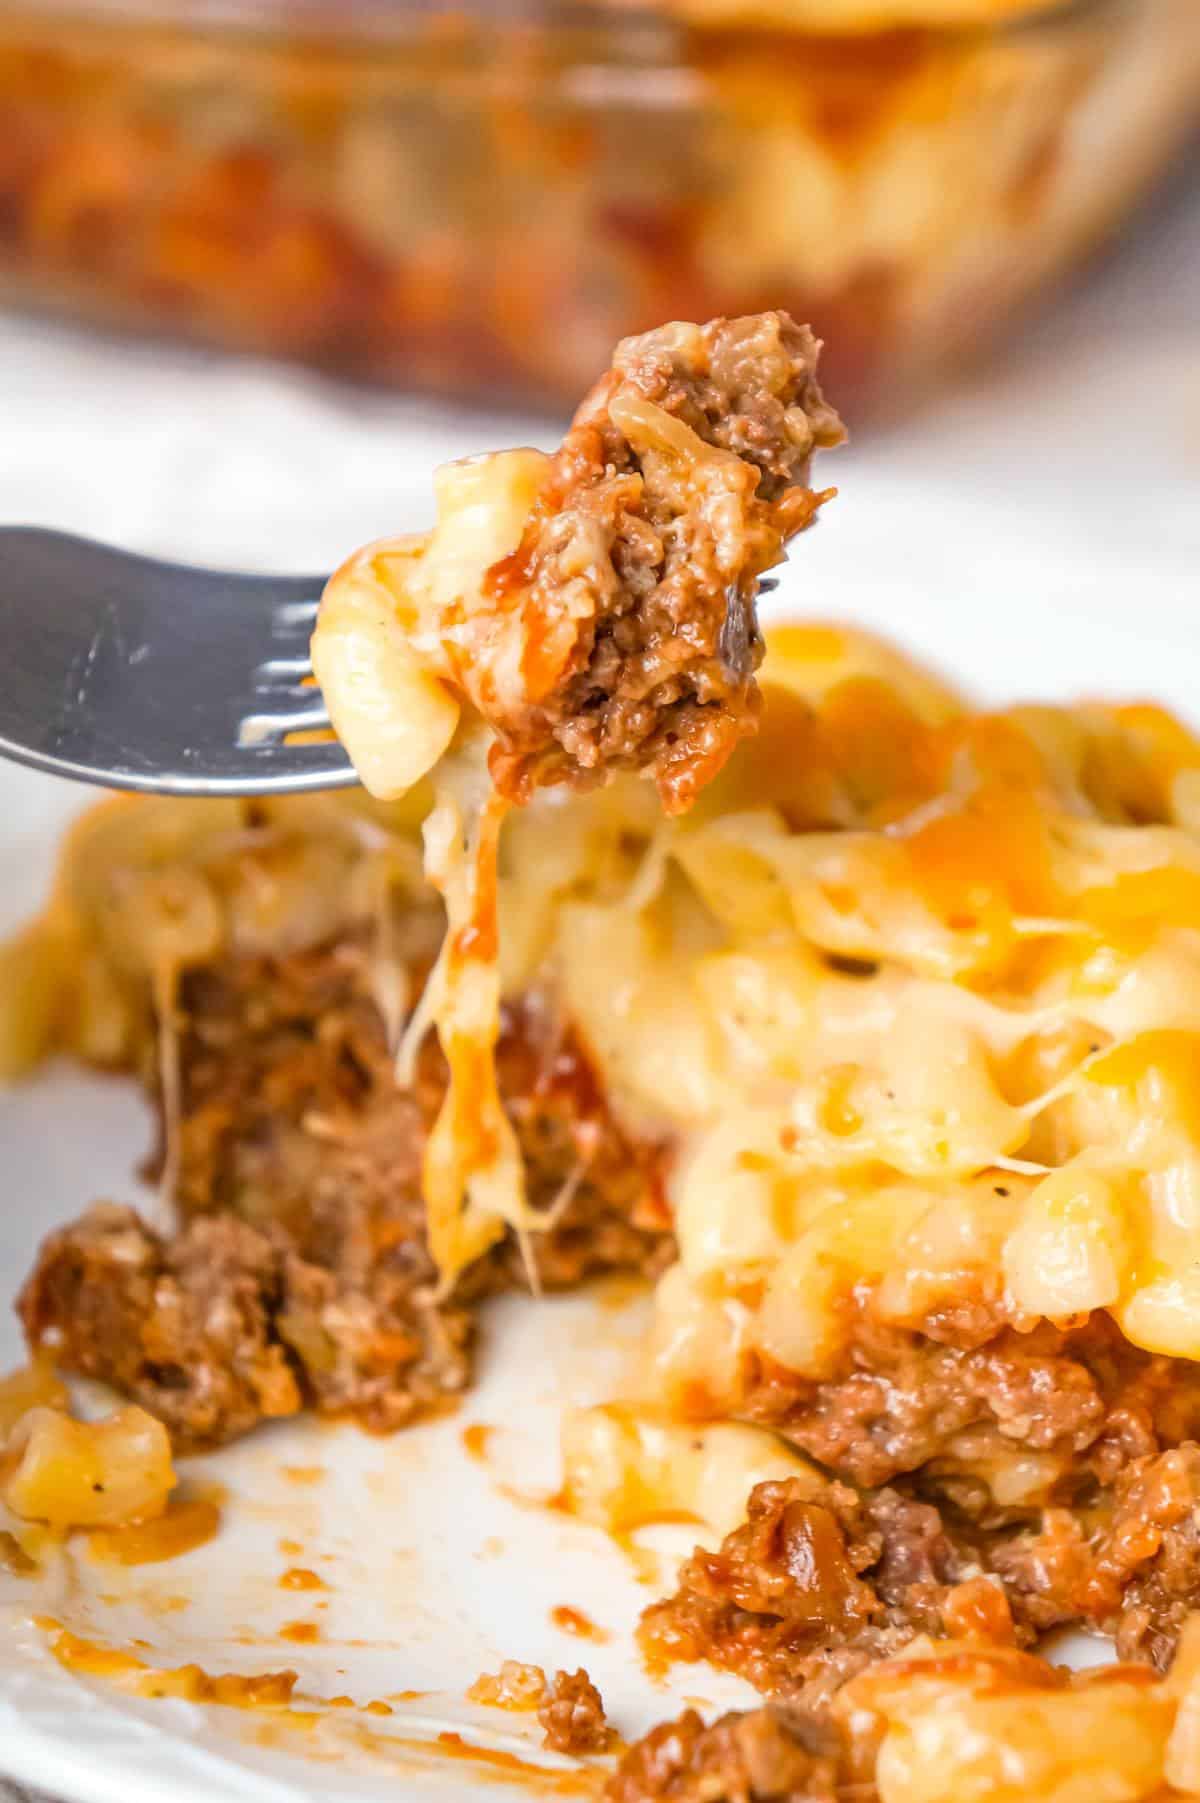 Mac and Cheese Meatloaf Casserole is a hearty dinner recipe with a ground beef meatloaf base with macaroni and cheese baked on top.